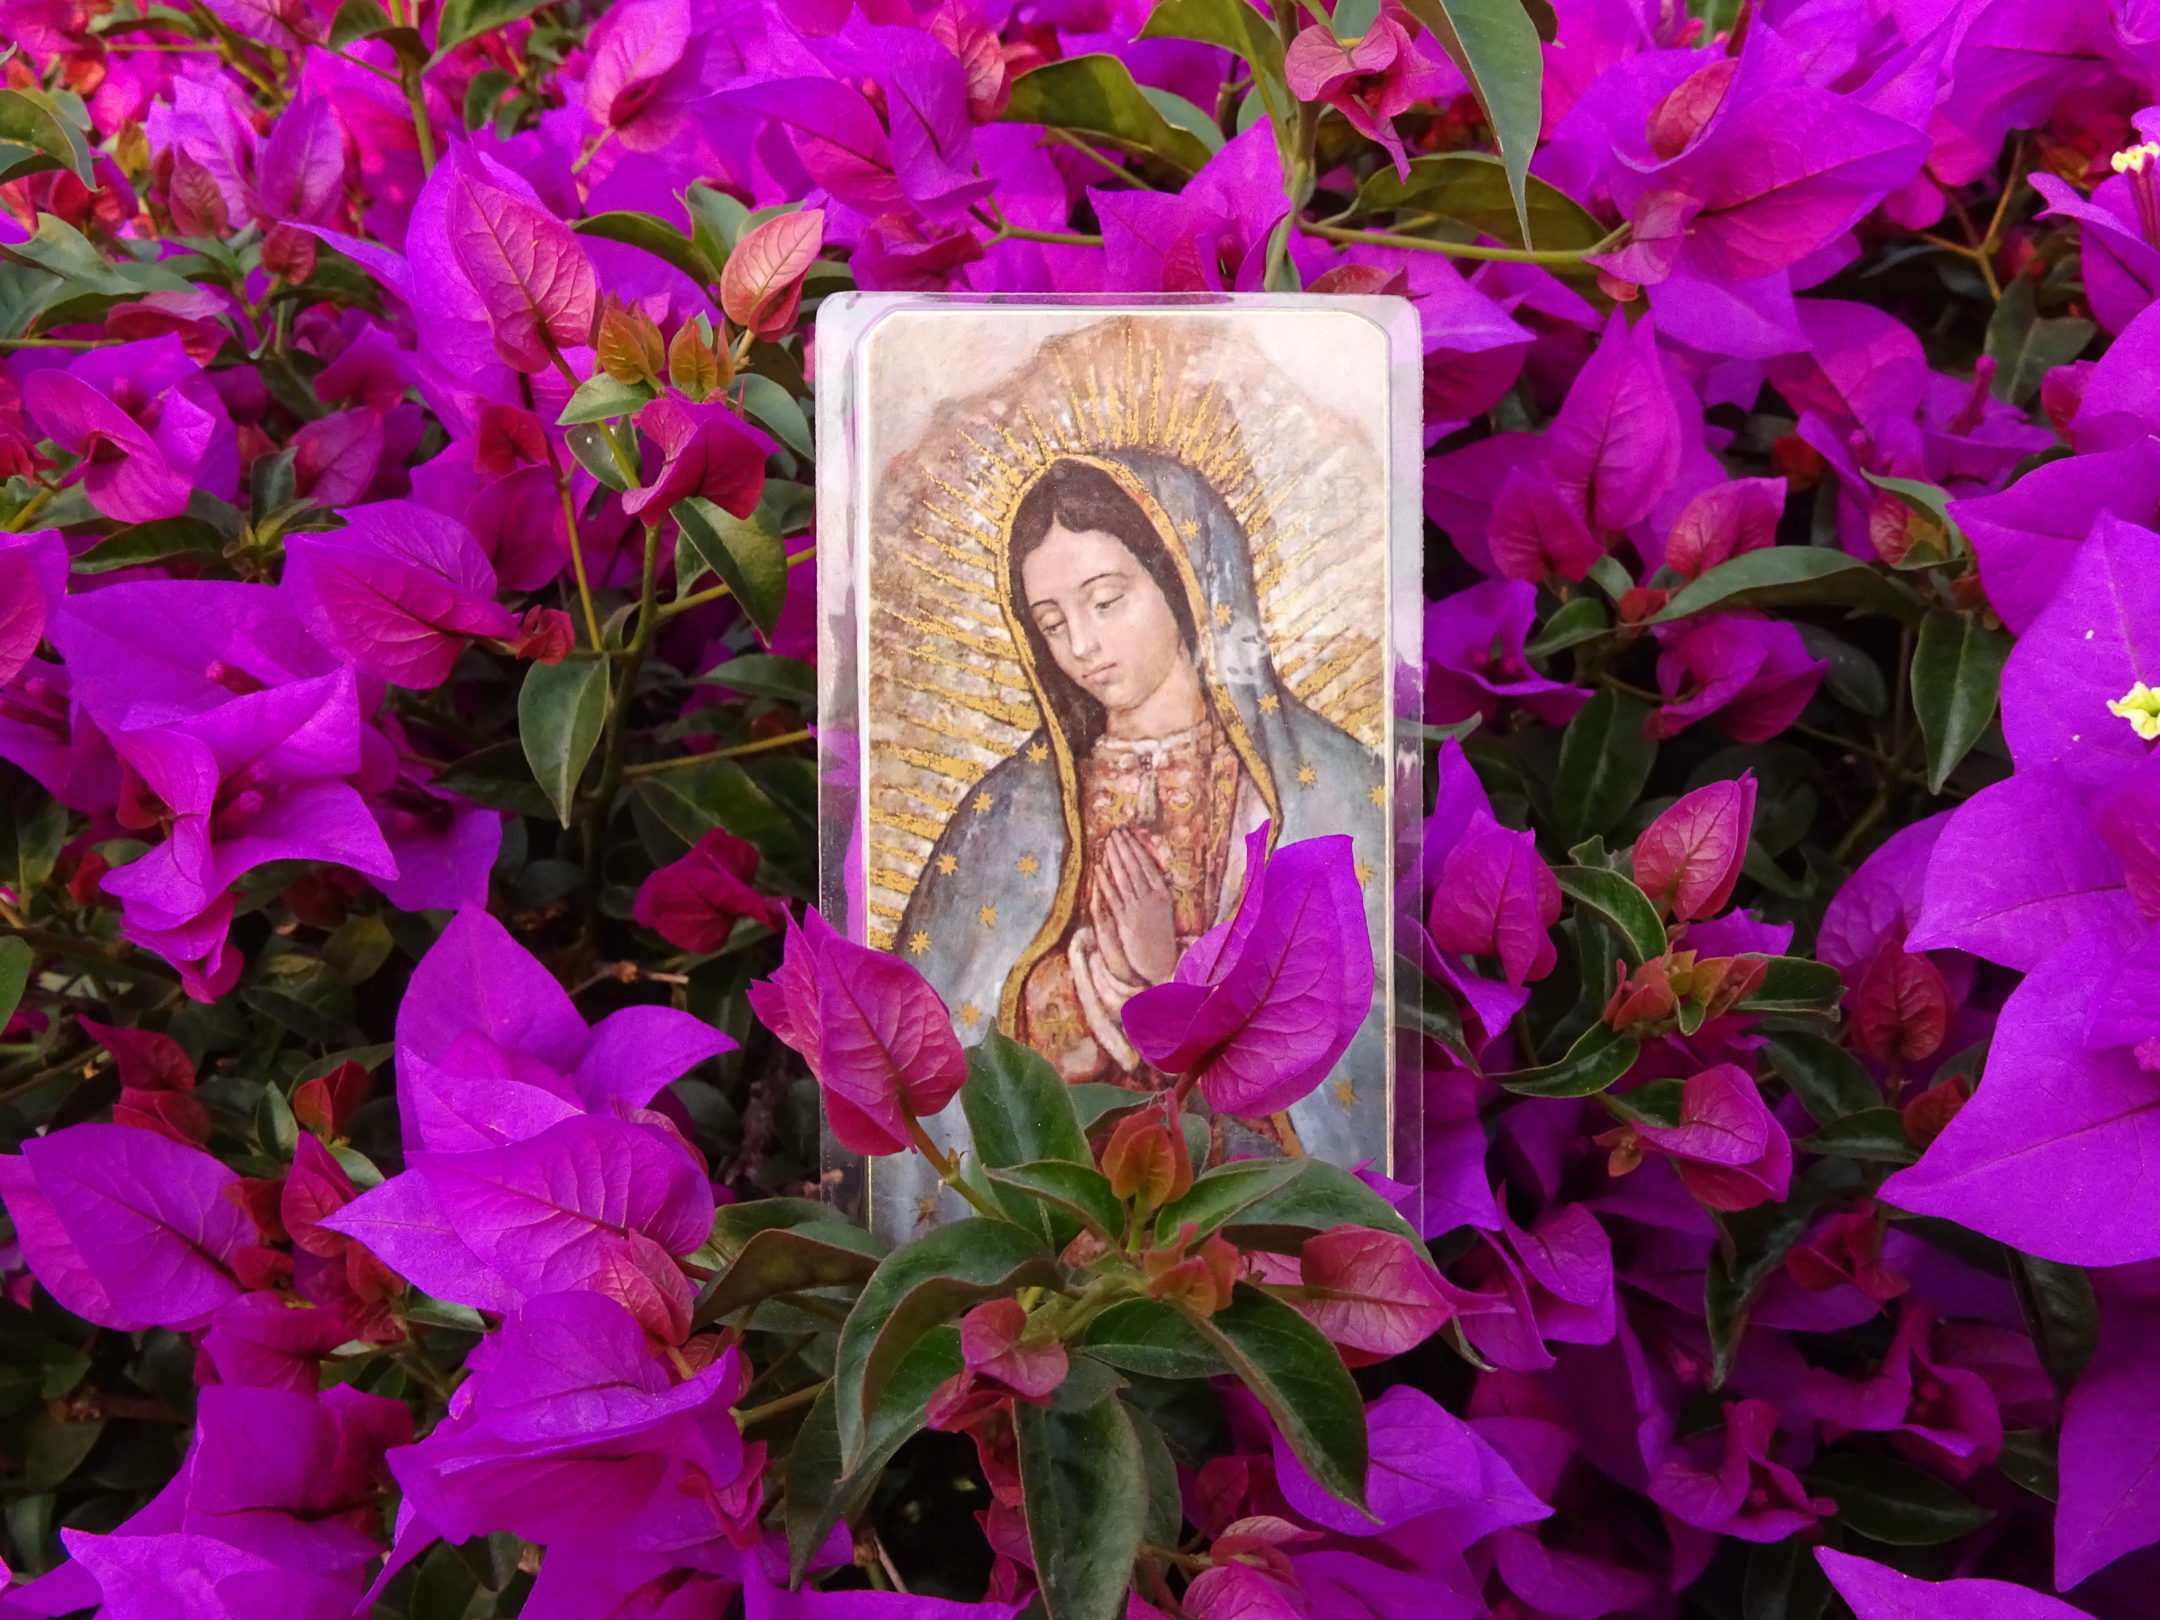 Image of Mary surrounded by purple flowers